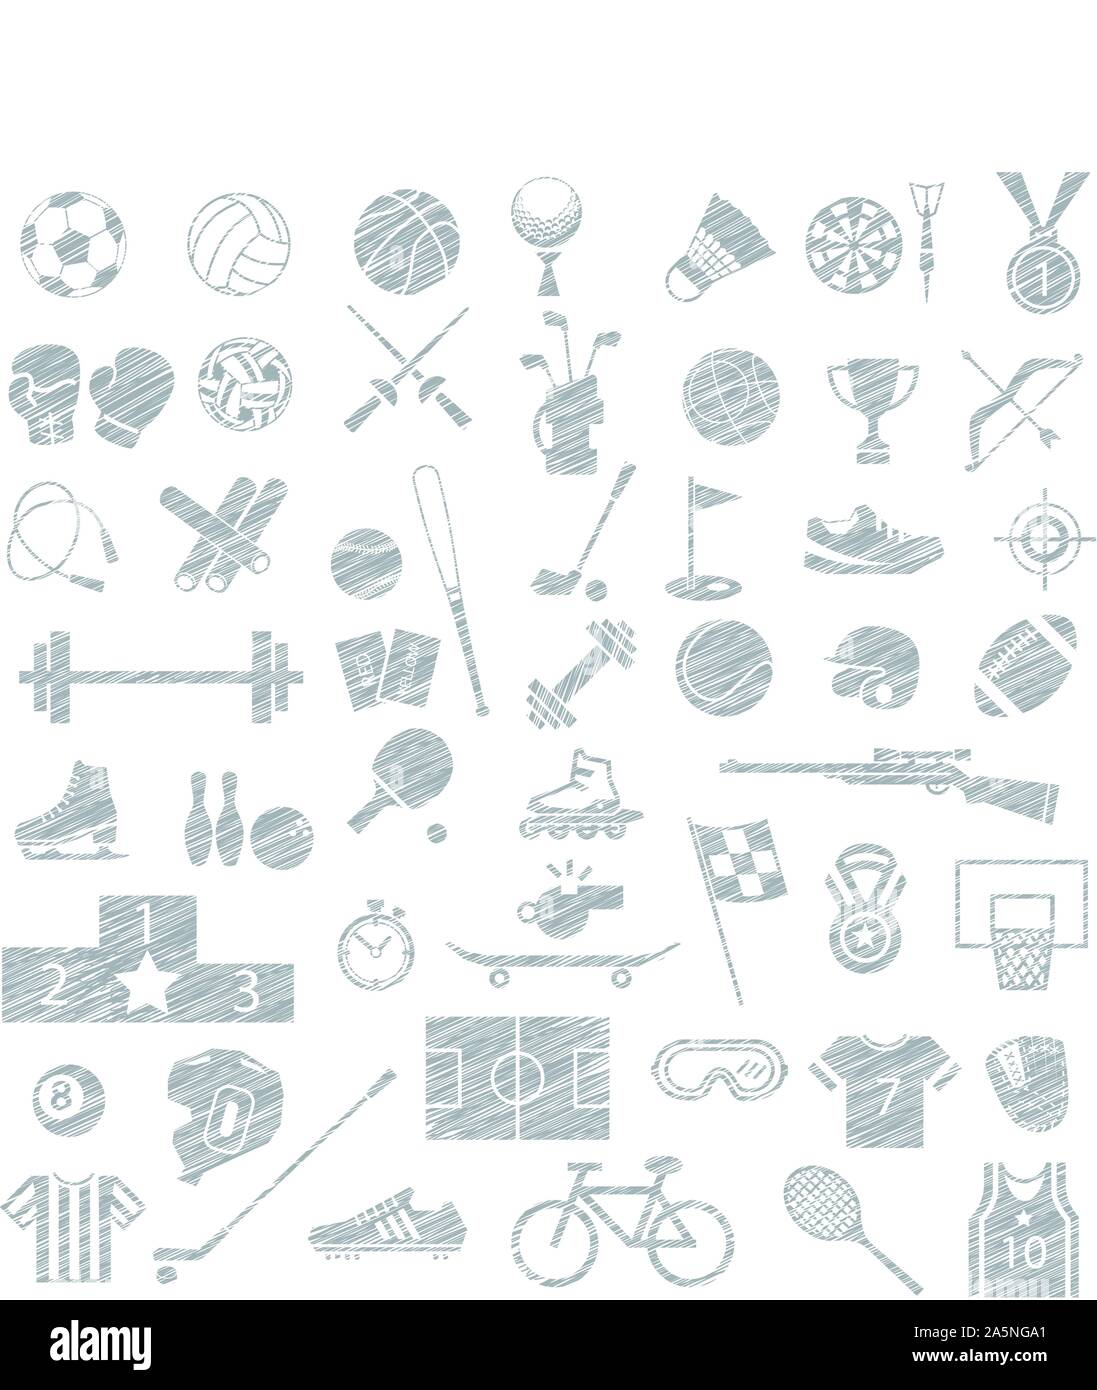 sport equipment icon set, drawing sketch vector style Stock Vector